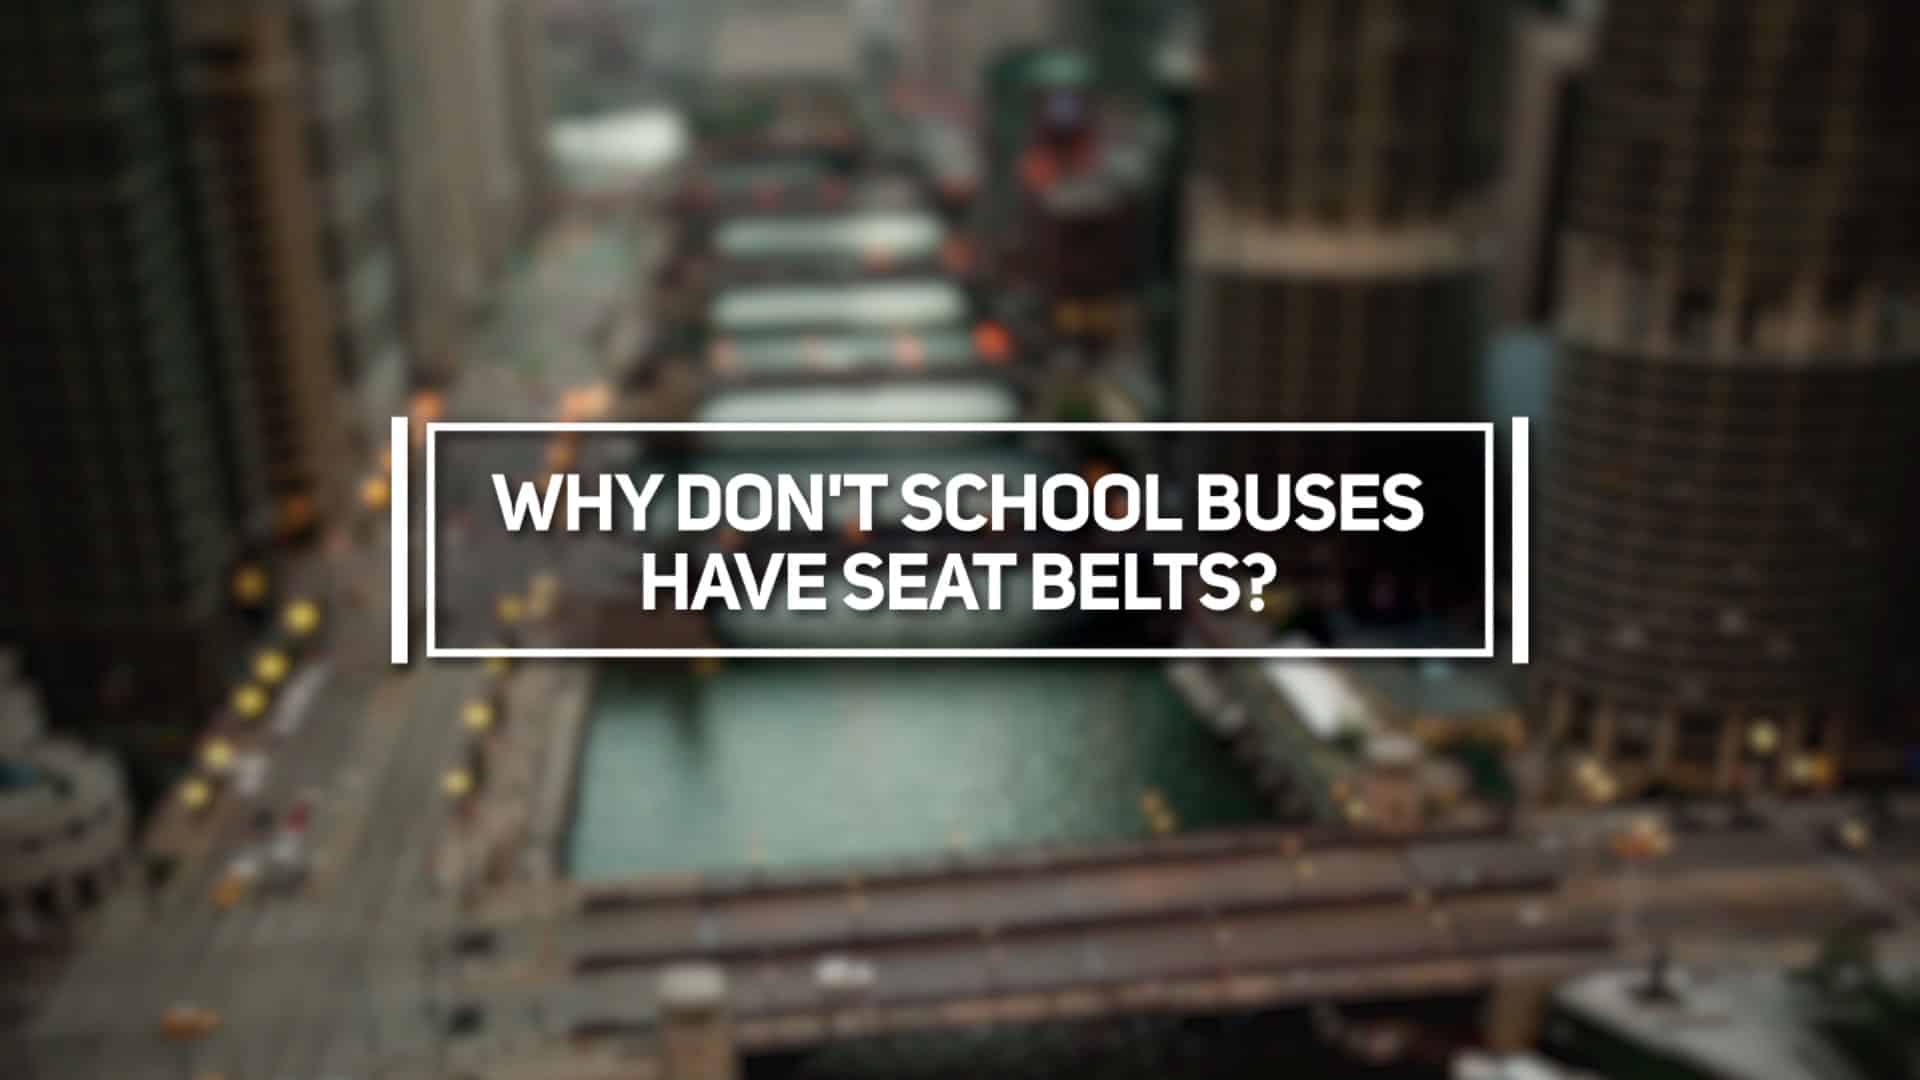 Why Don't School Buses Have Seat Belts?